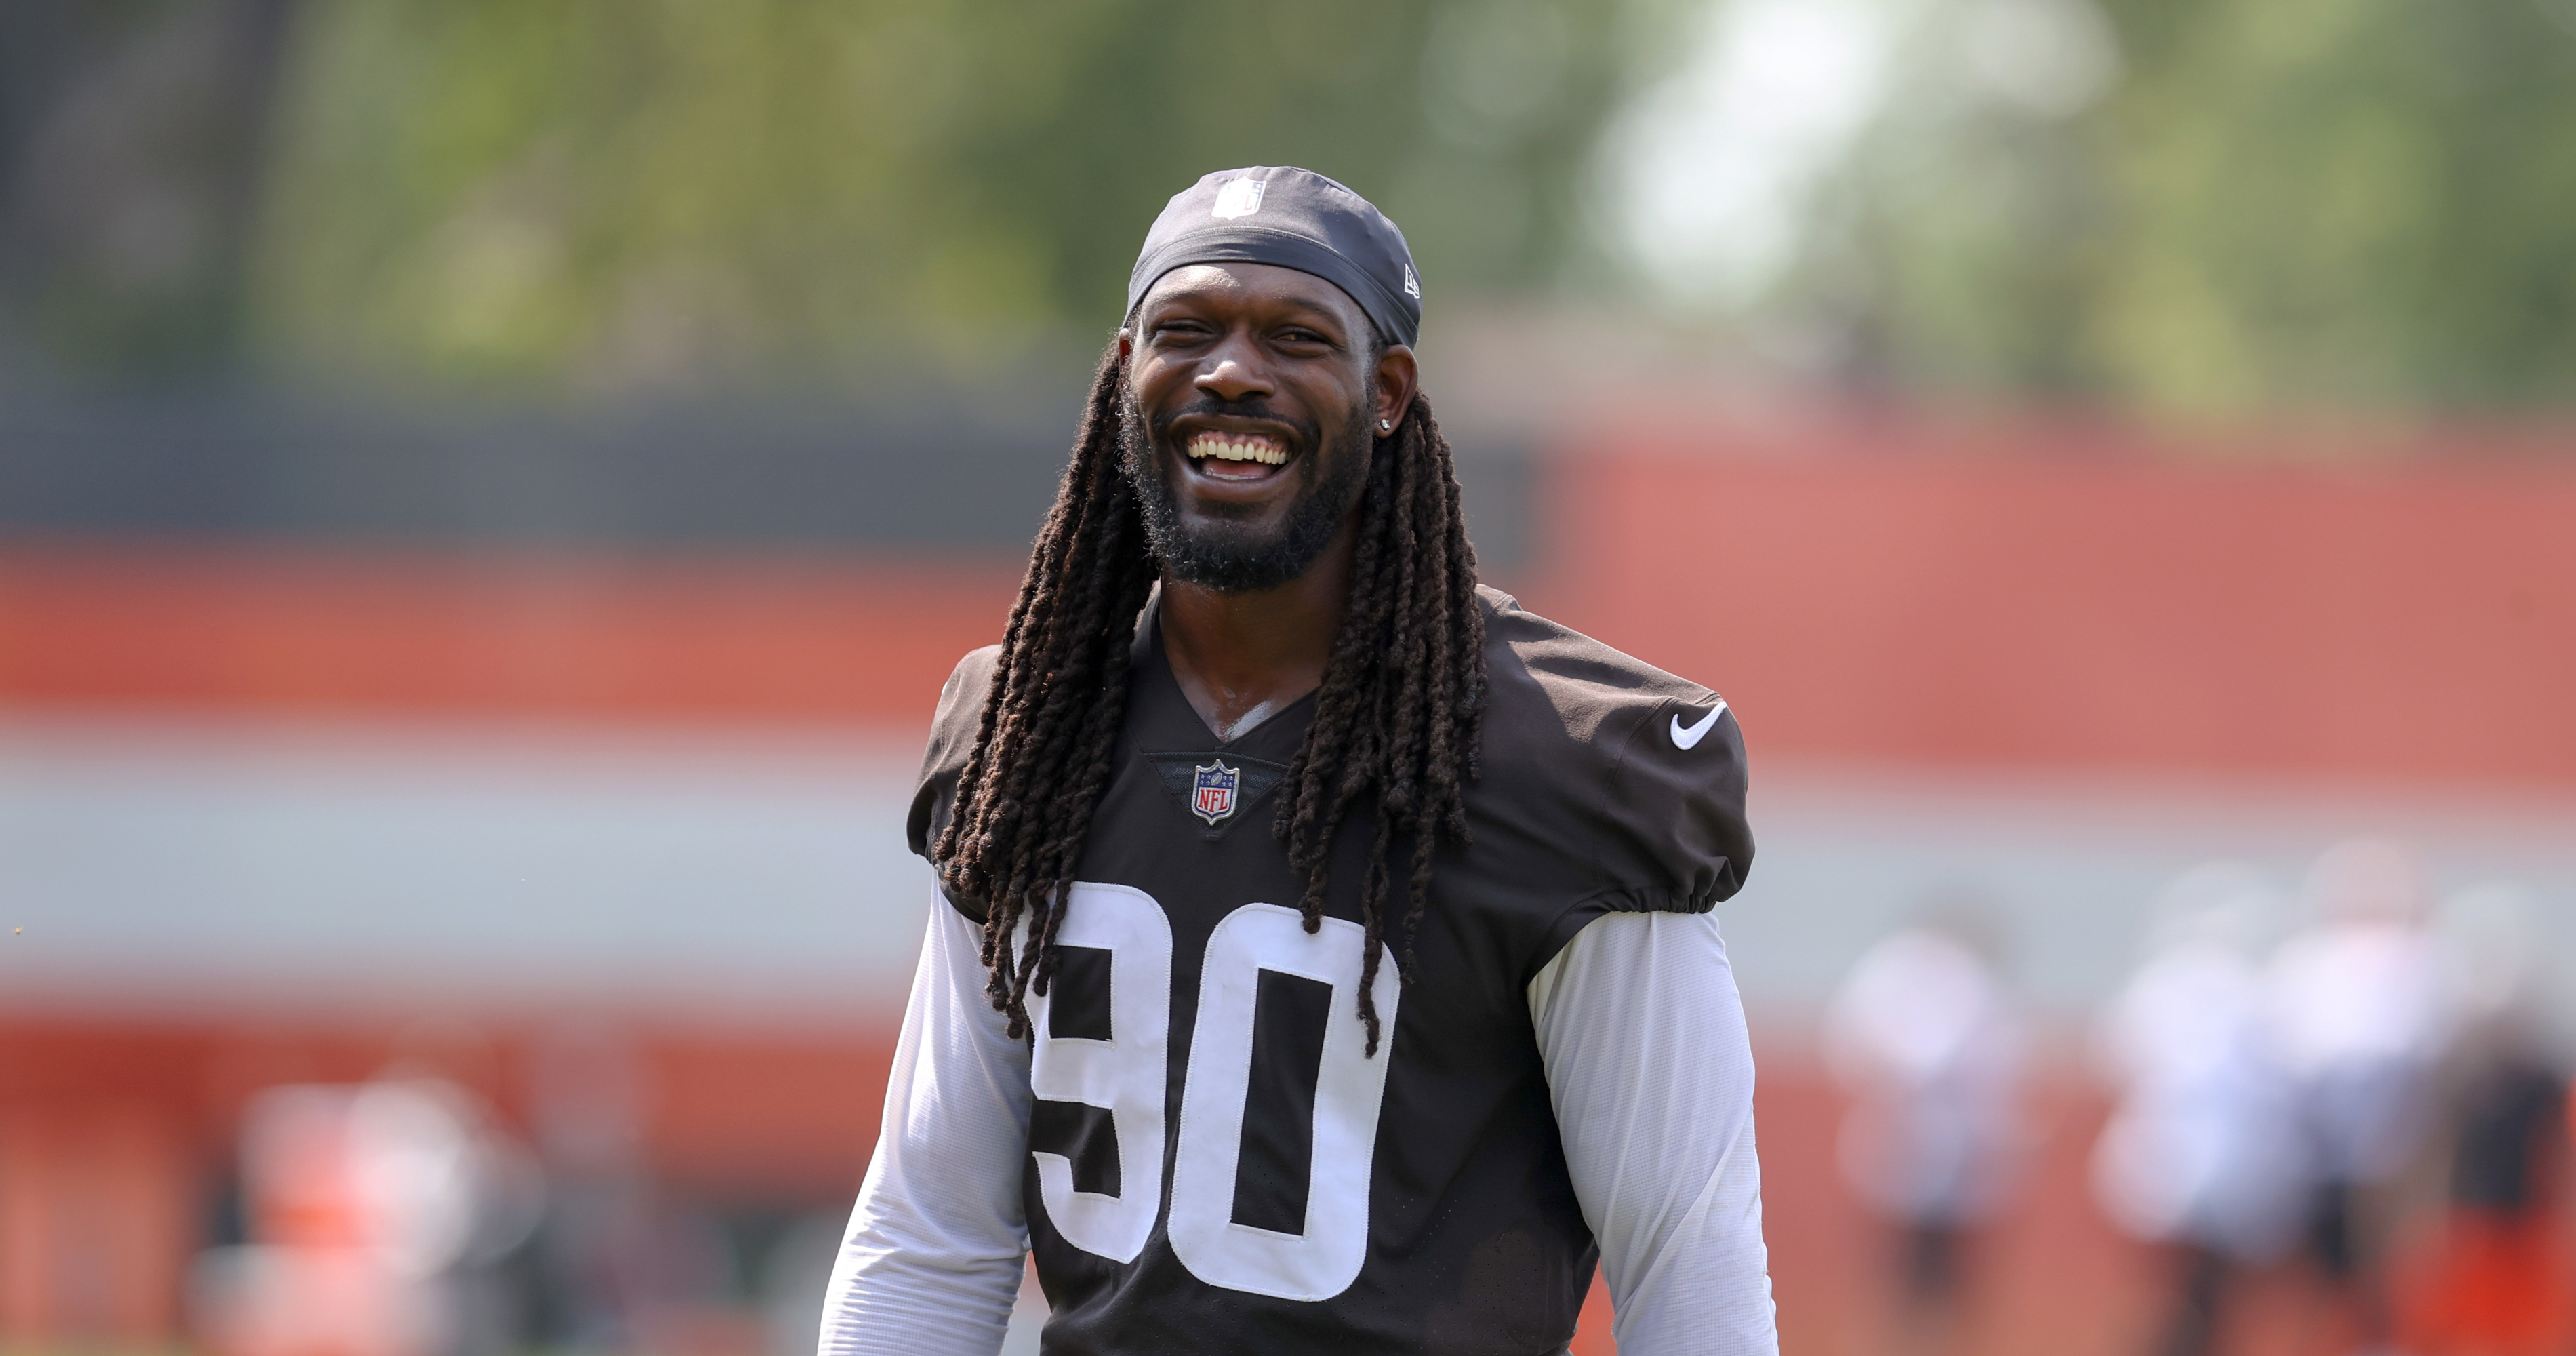 Browns' Jadeveon Clowney Excited to Match Up vs. Guards 'They're Not